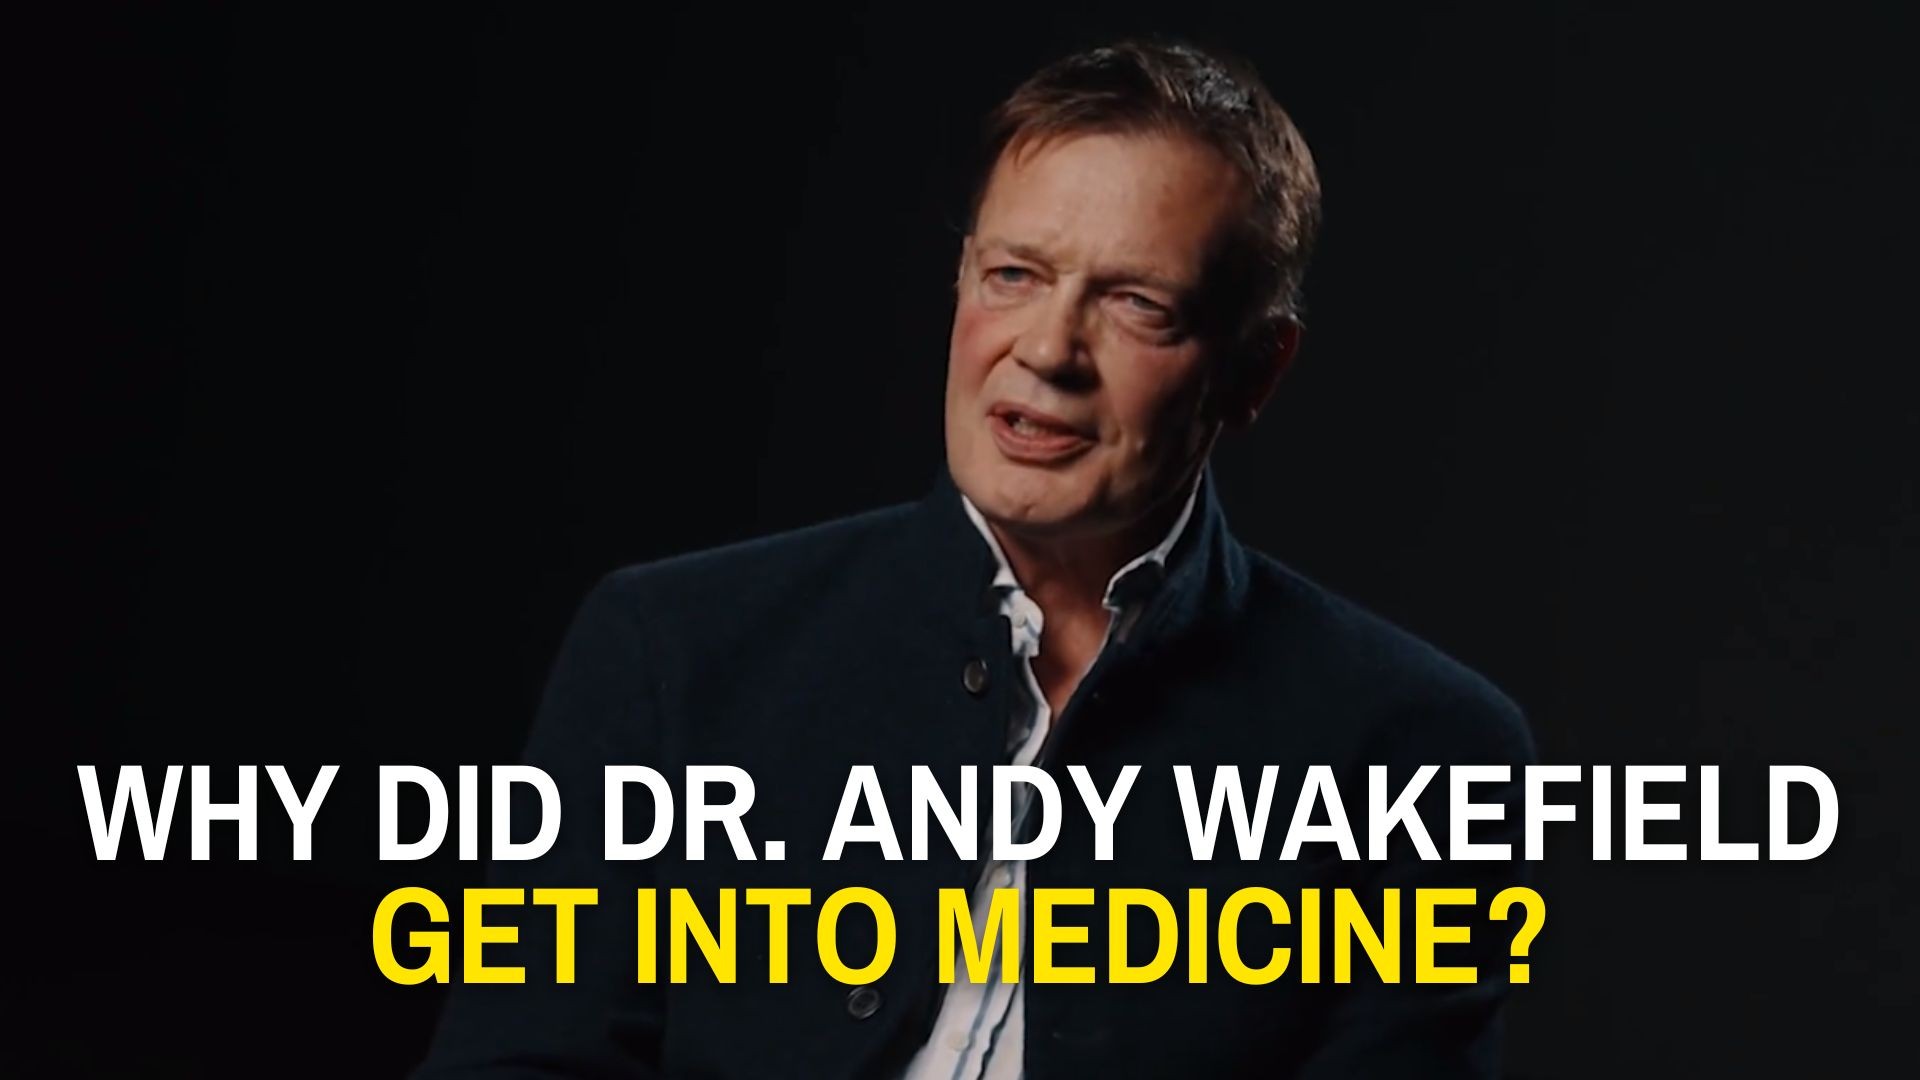 РЂБWhat Made  Dr. Andy Wakefield Get Into Medicine?